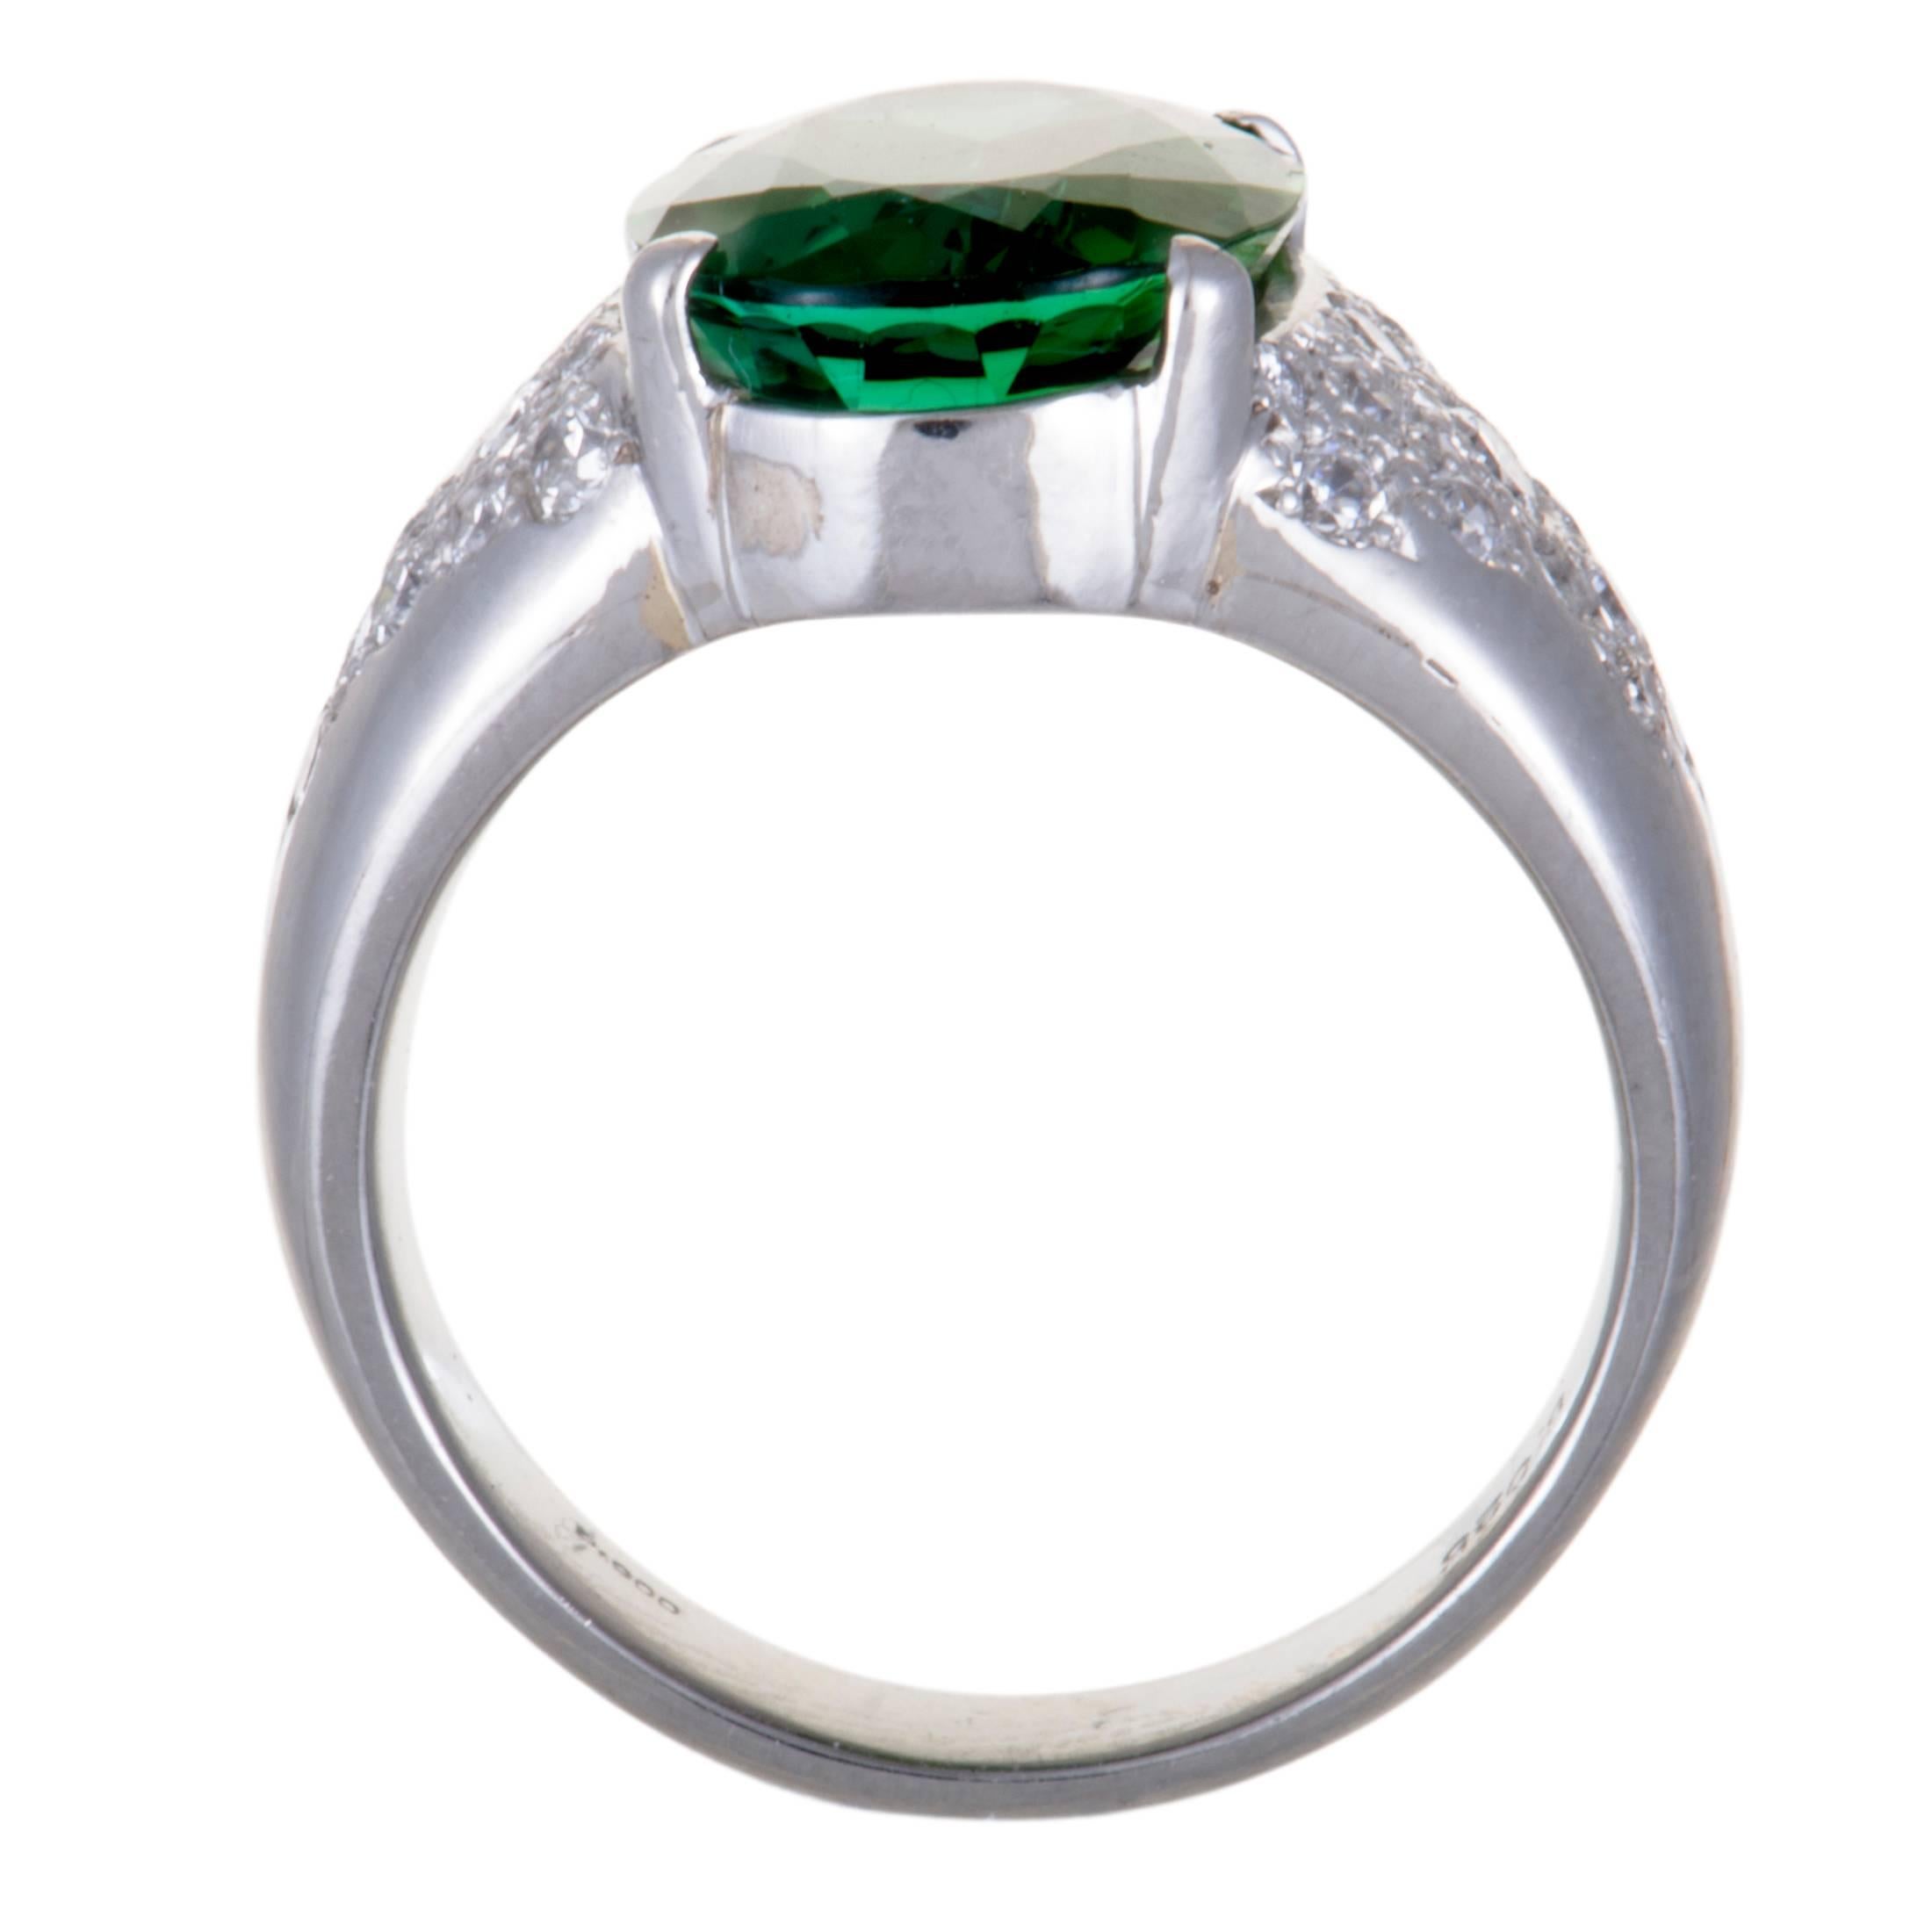 A look of absolute prestige and extravagance is achieved in this fabulous ring by combining the ever-luxurious platinum with incredibly resplendent gems. The ring is set with a majestic green tourmaline that is lustrously accentuated by a plethora